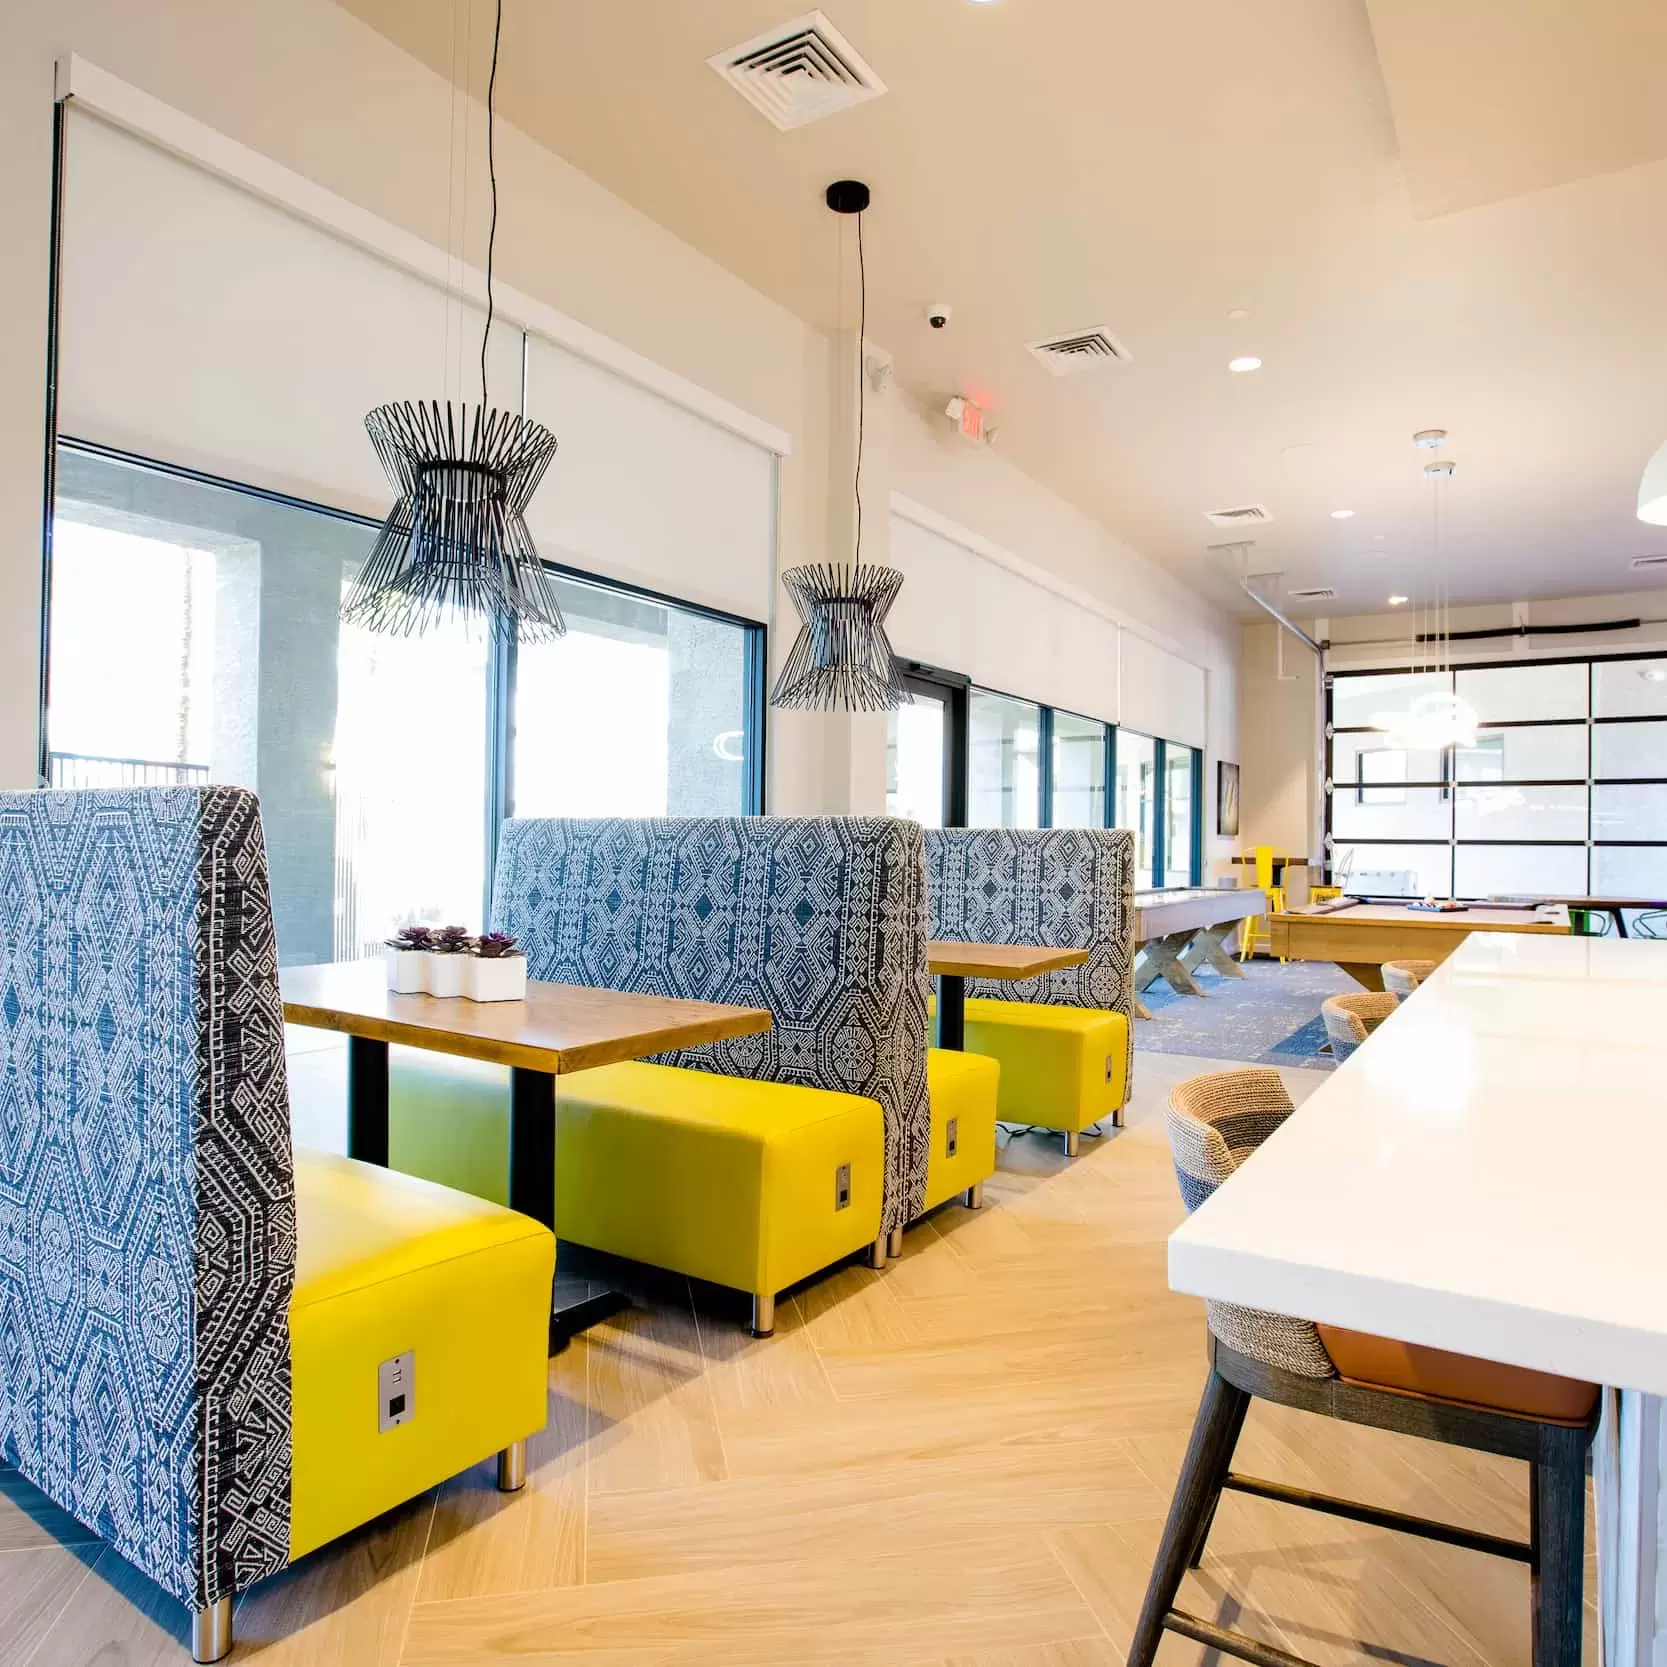 The Resident Hub, with plenty of comfortable seating for dining, socializing, or playing games.